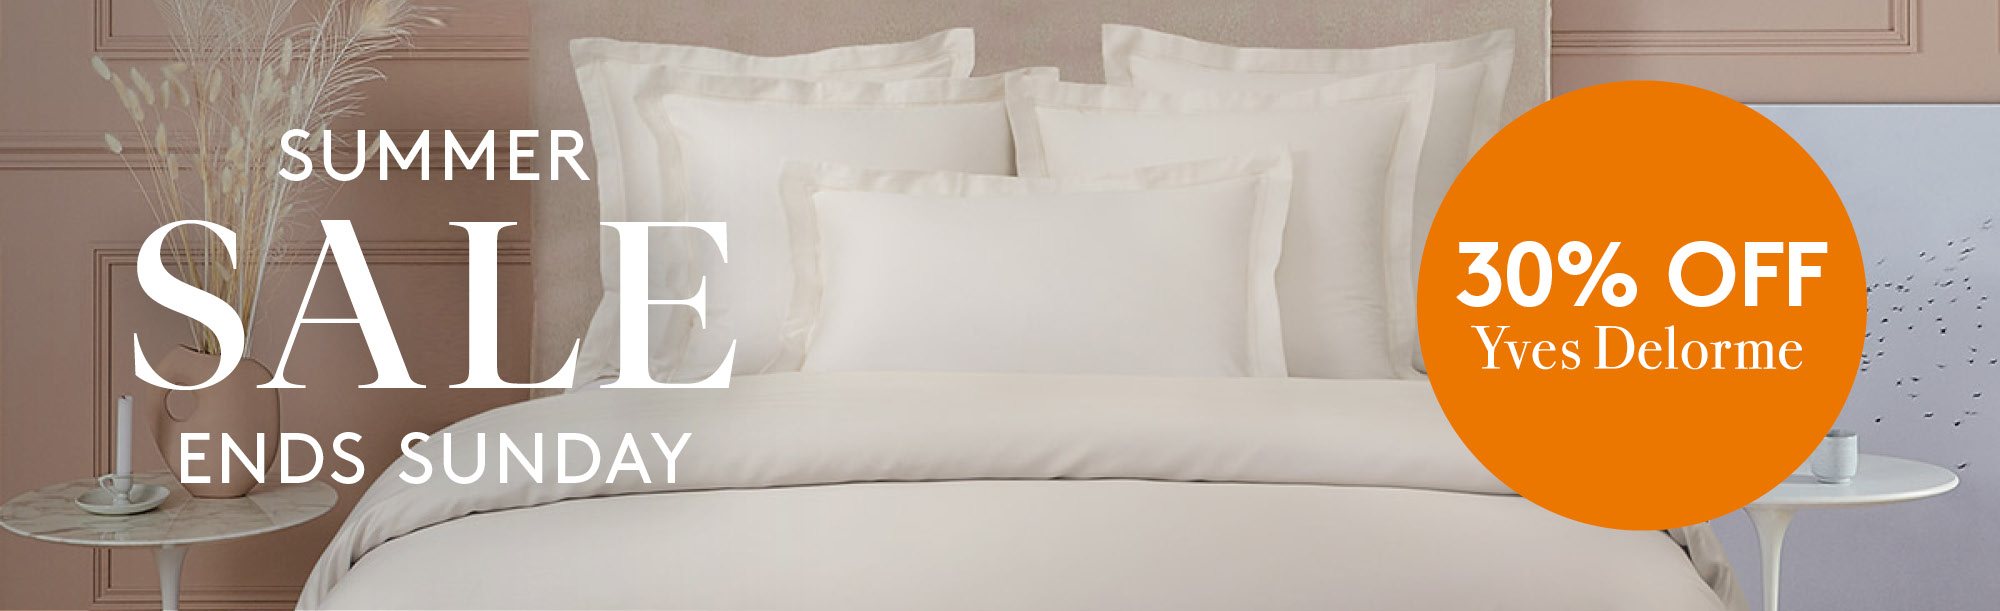 And So To Bed Summer Sale Offer 30% Off Yves Delorme